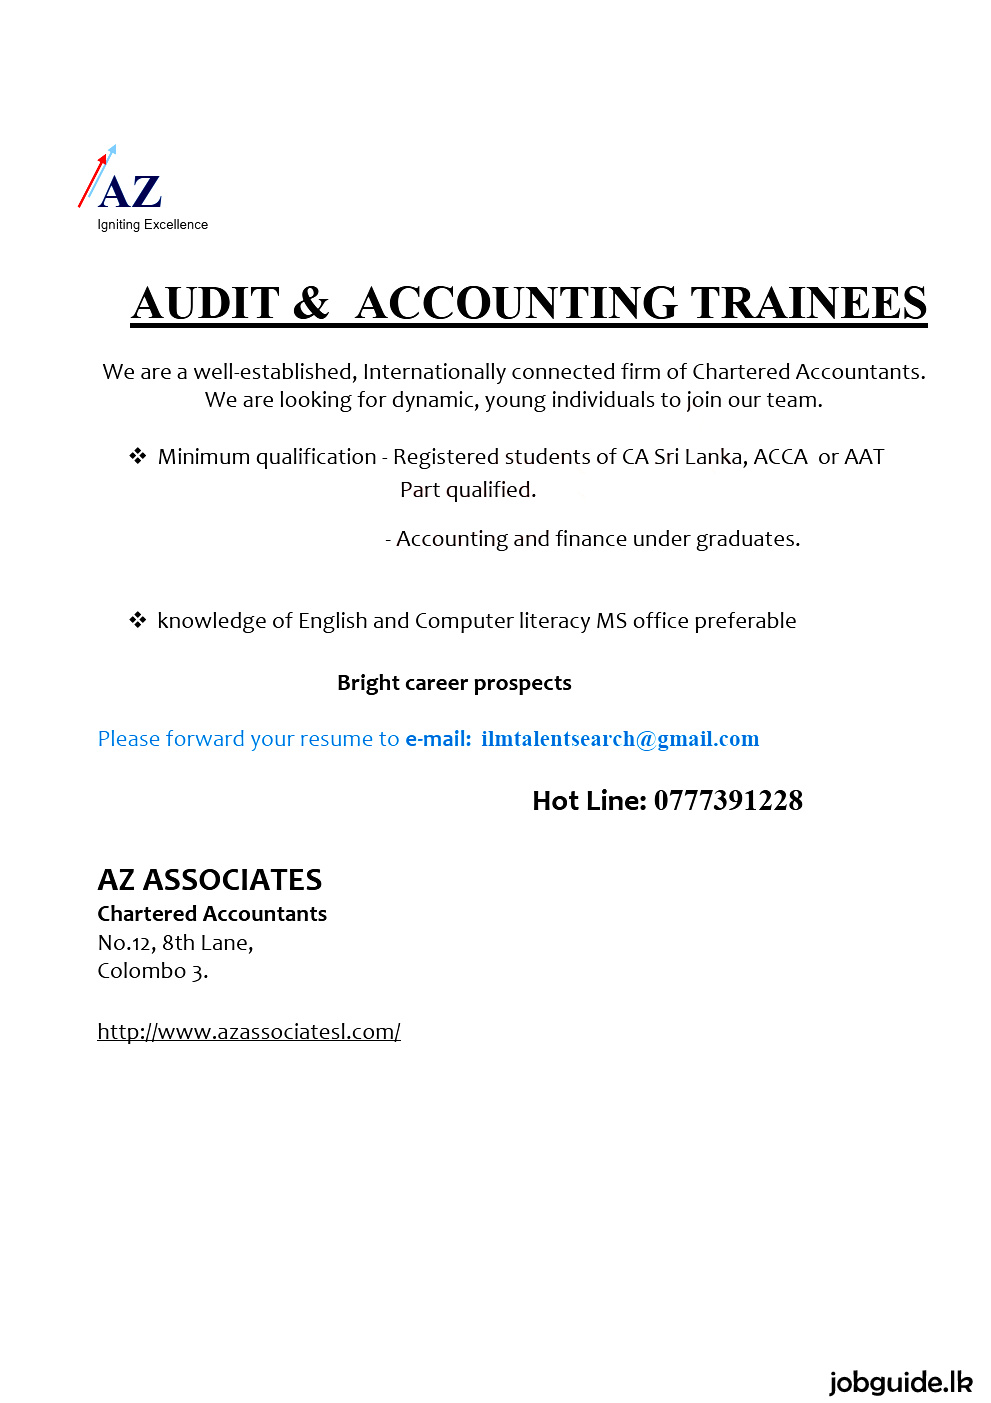 Audit and Accounting Trainee Job for Part Qualification